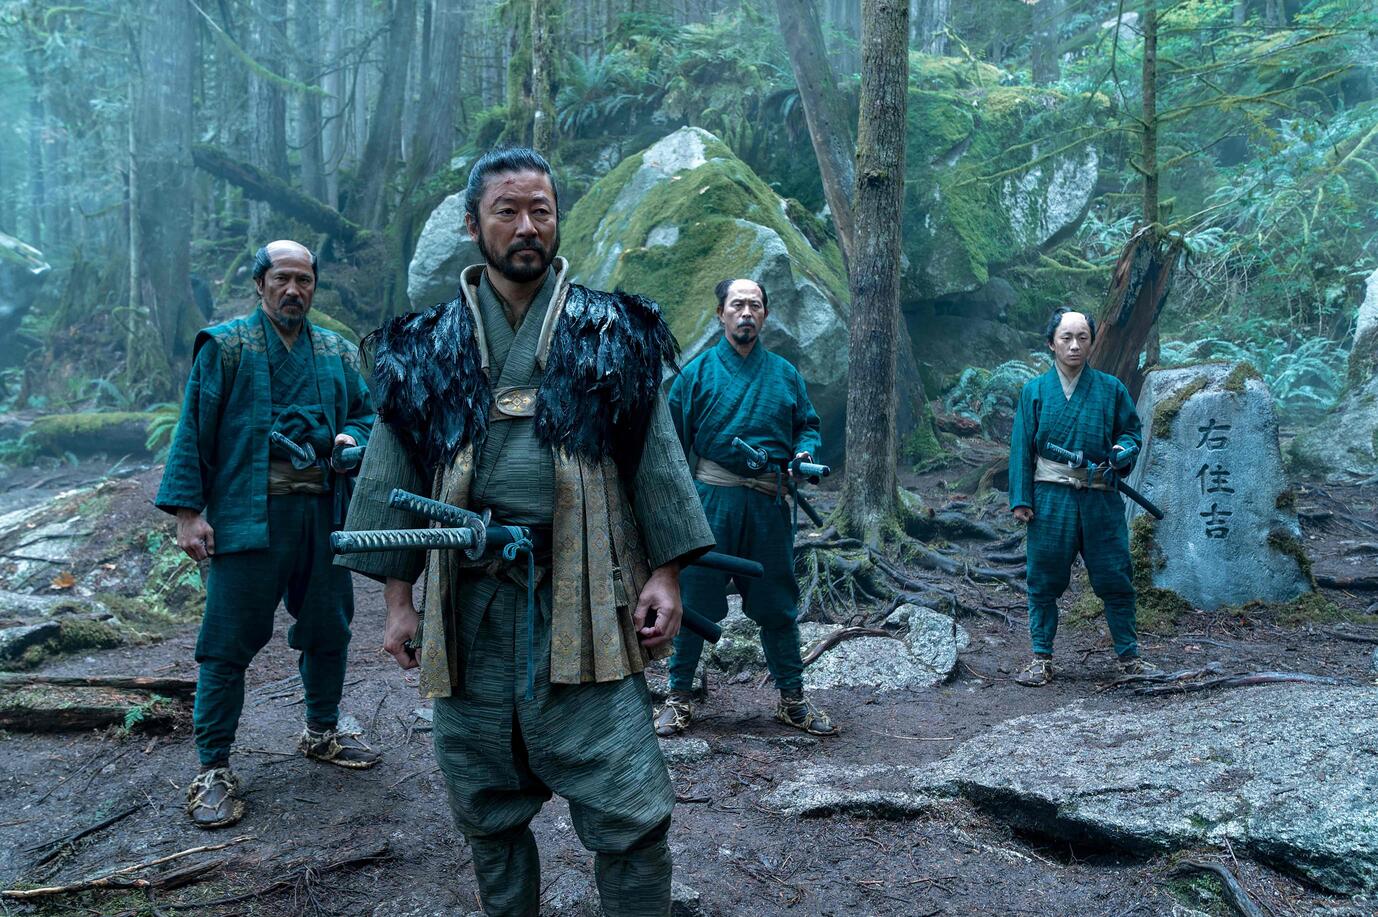  Four warriors in the forest in this image from FX Productions.